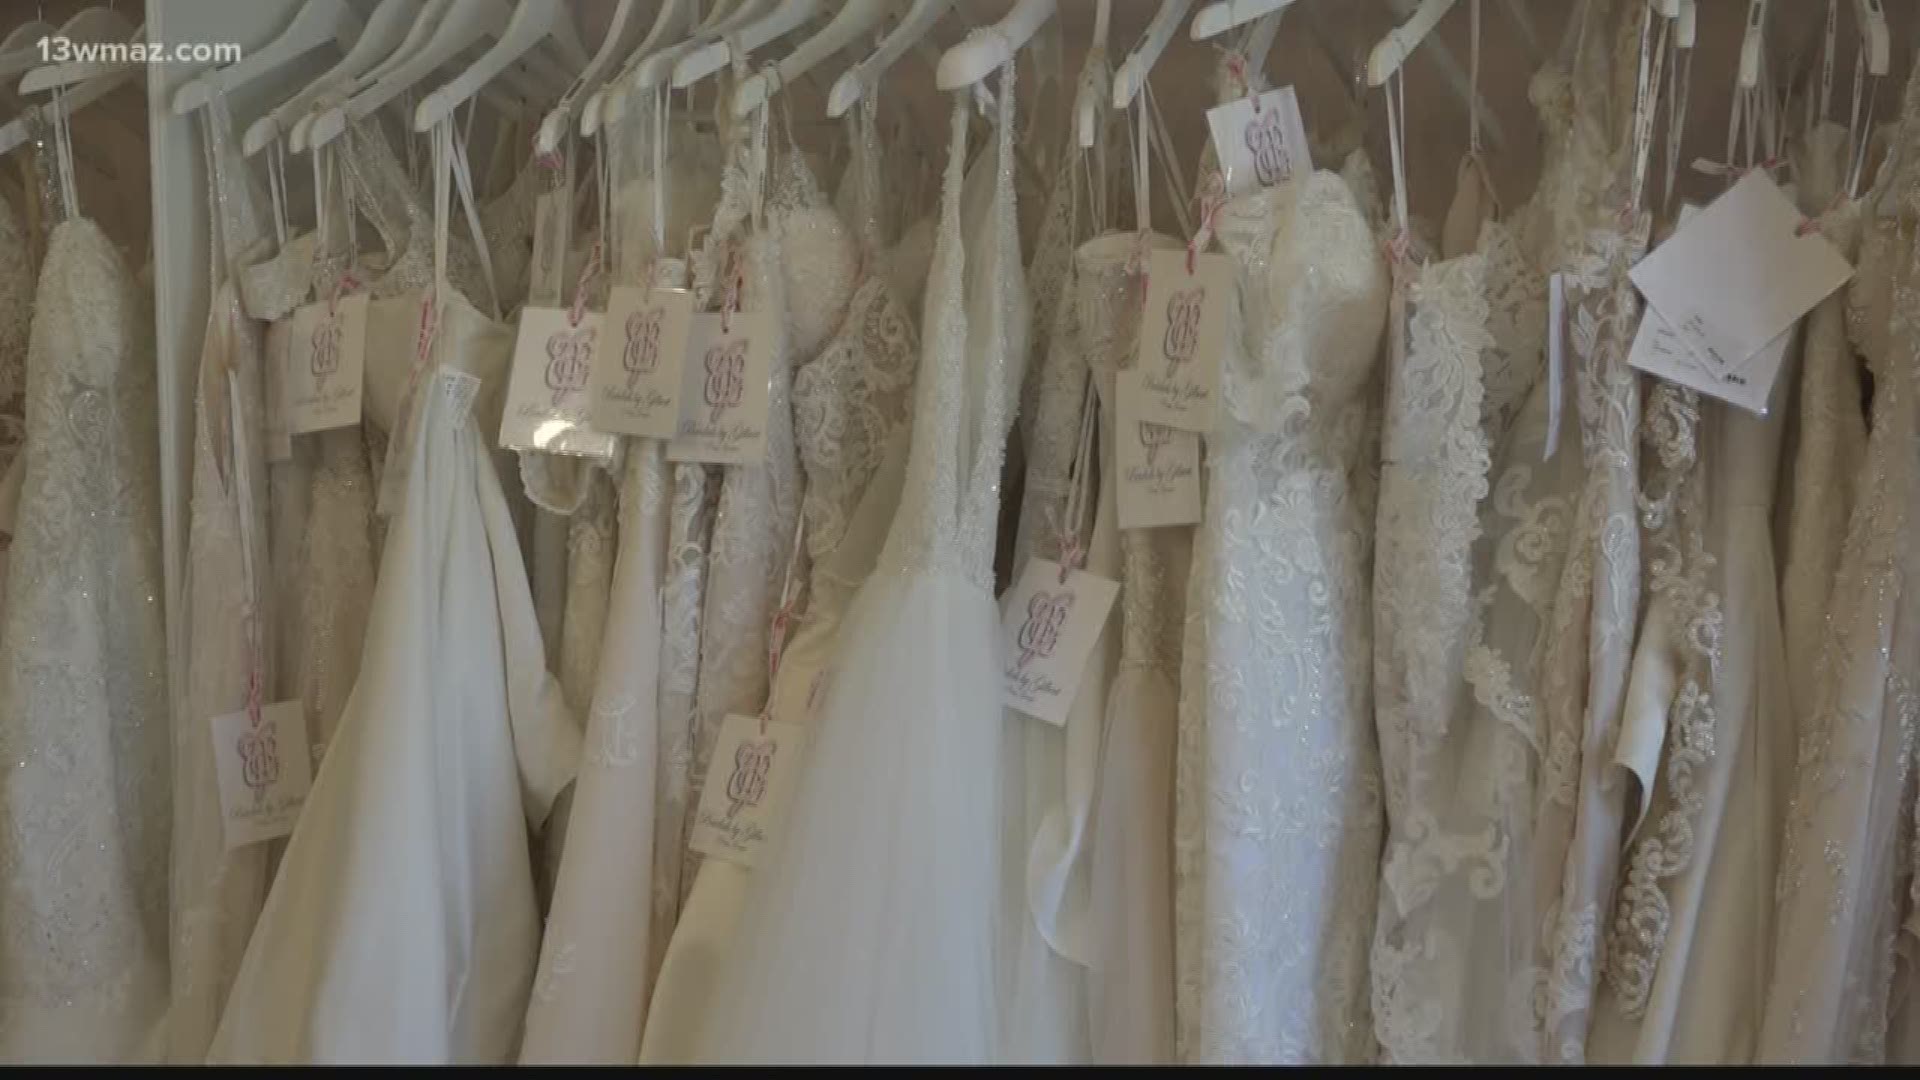 Bridals by Gilbert in downtown Perry says they'll be giving away 12 wedding dresses for free to military brides next Thursday